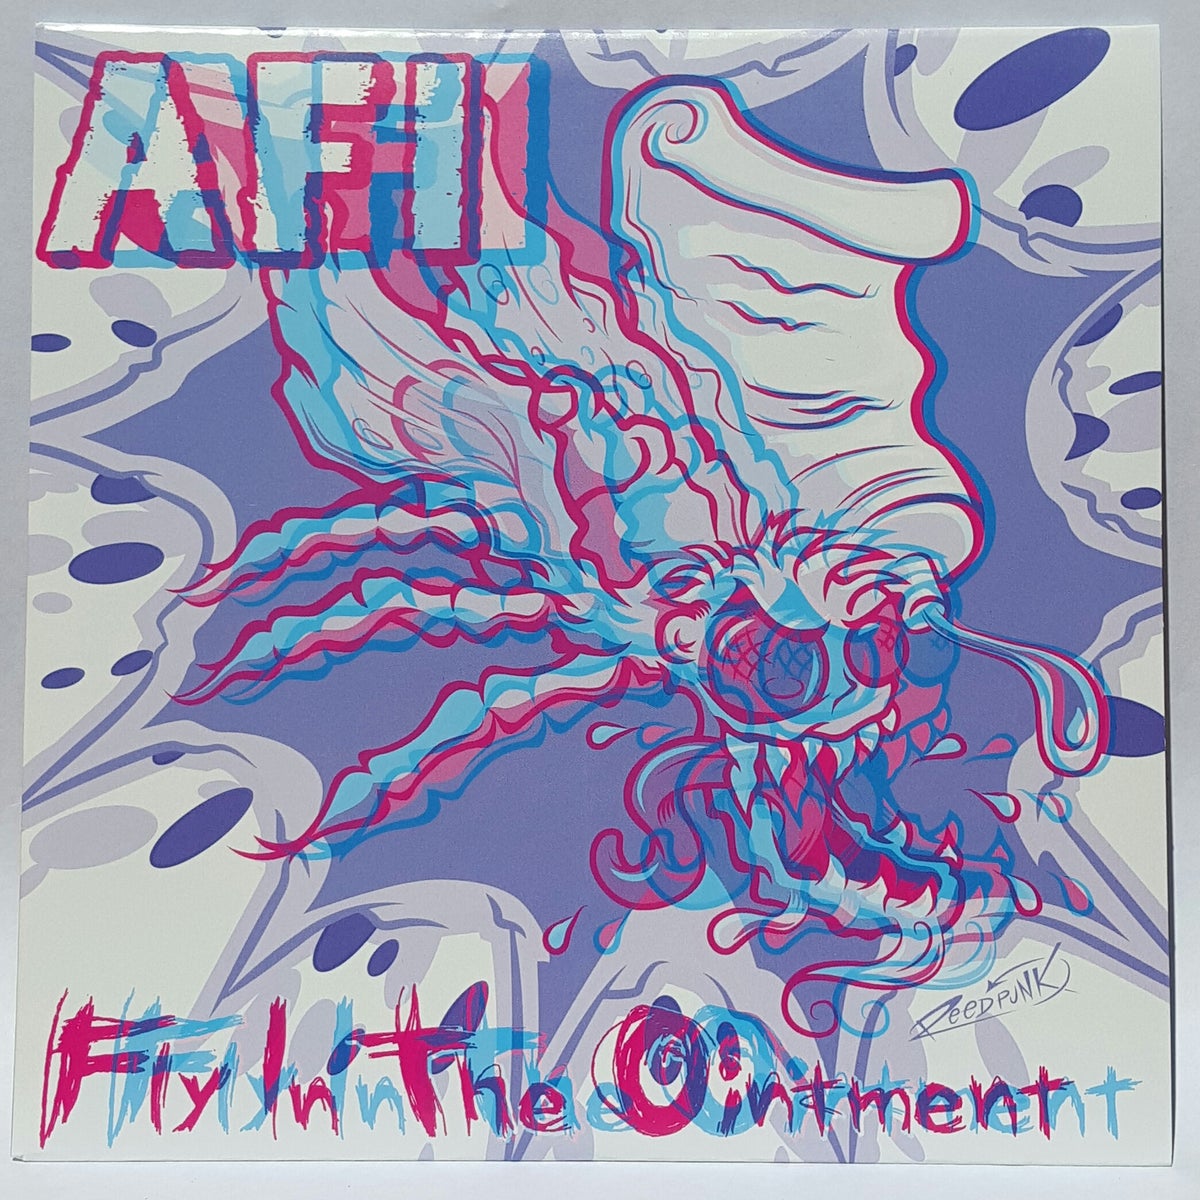 WEDGE #1 AFI "Fly in the Ointment" 7" 3-D Edition! | WEDGE